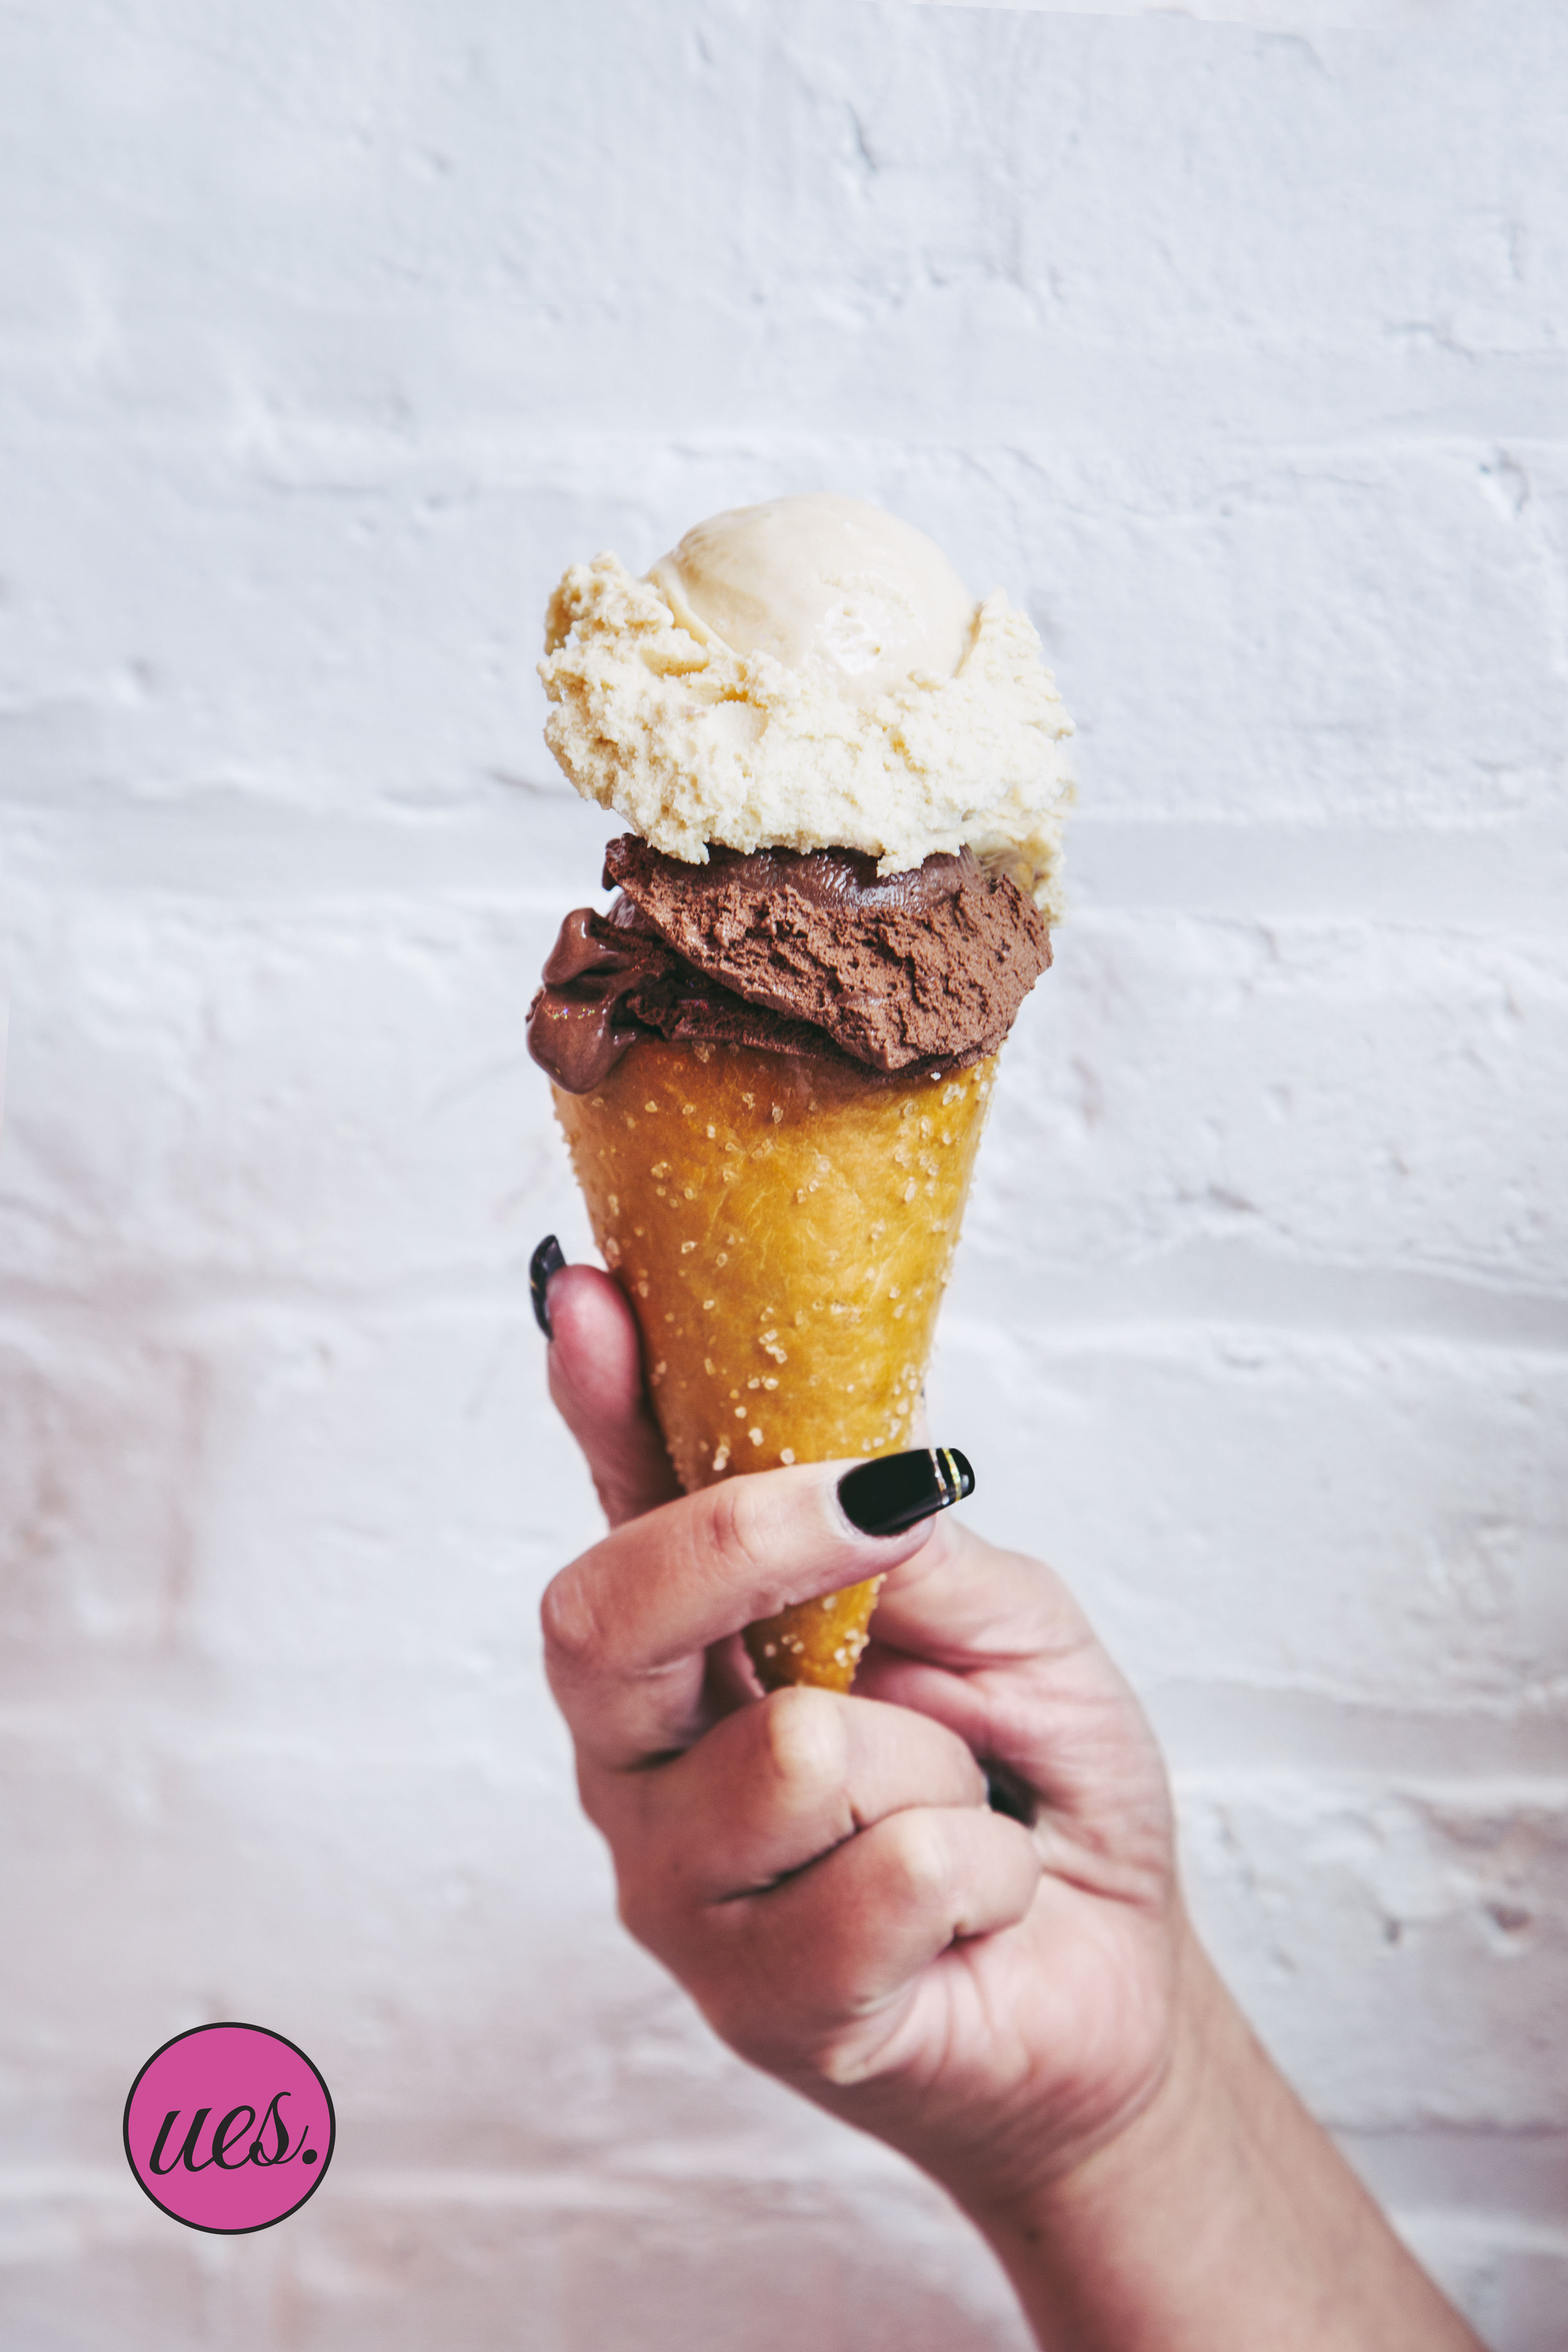 This Secret NYC Speakeasy Is Inside Of An Ice Cream Parlor • The UES -  Secret NYC